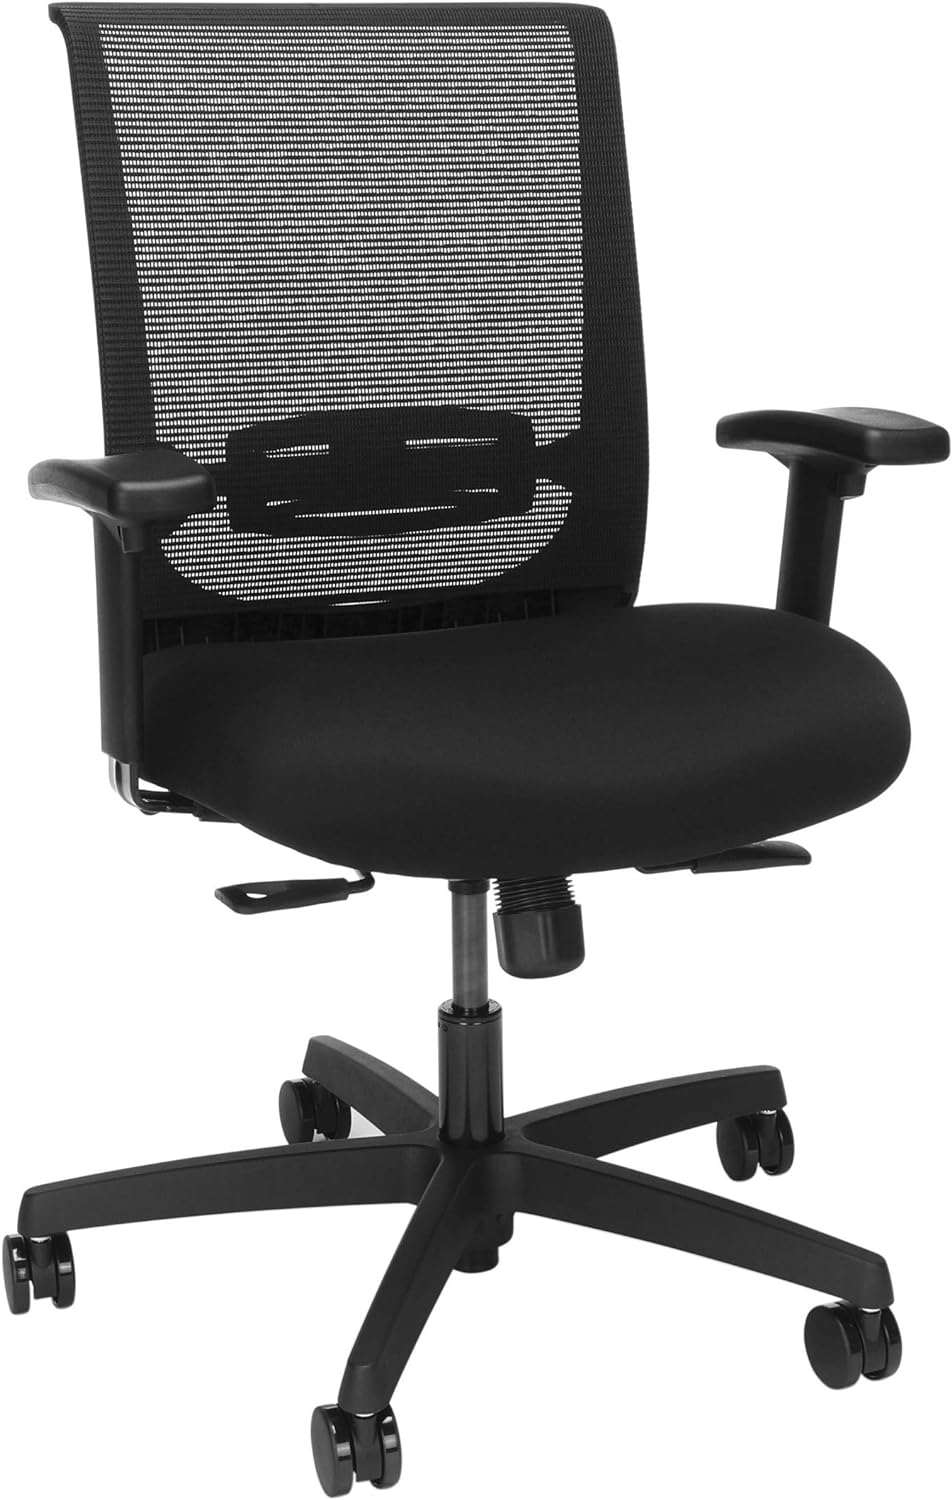 HON Convergence Mesh Back Task Chair with Height-Adjustable Arms, in Black